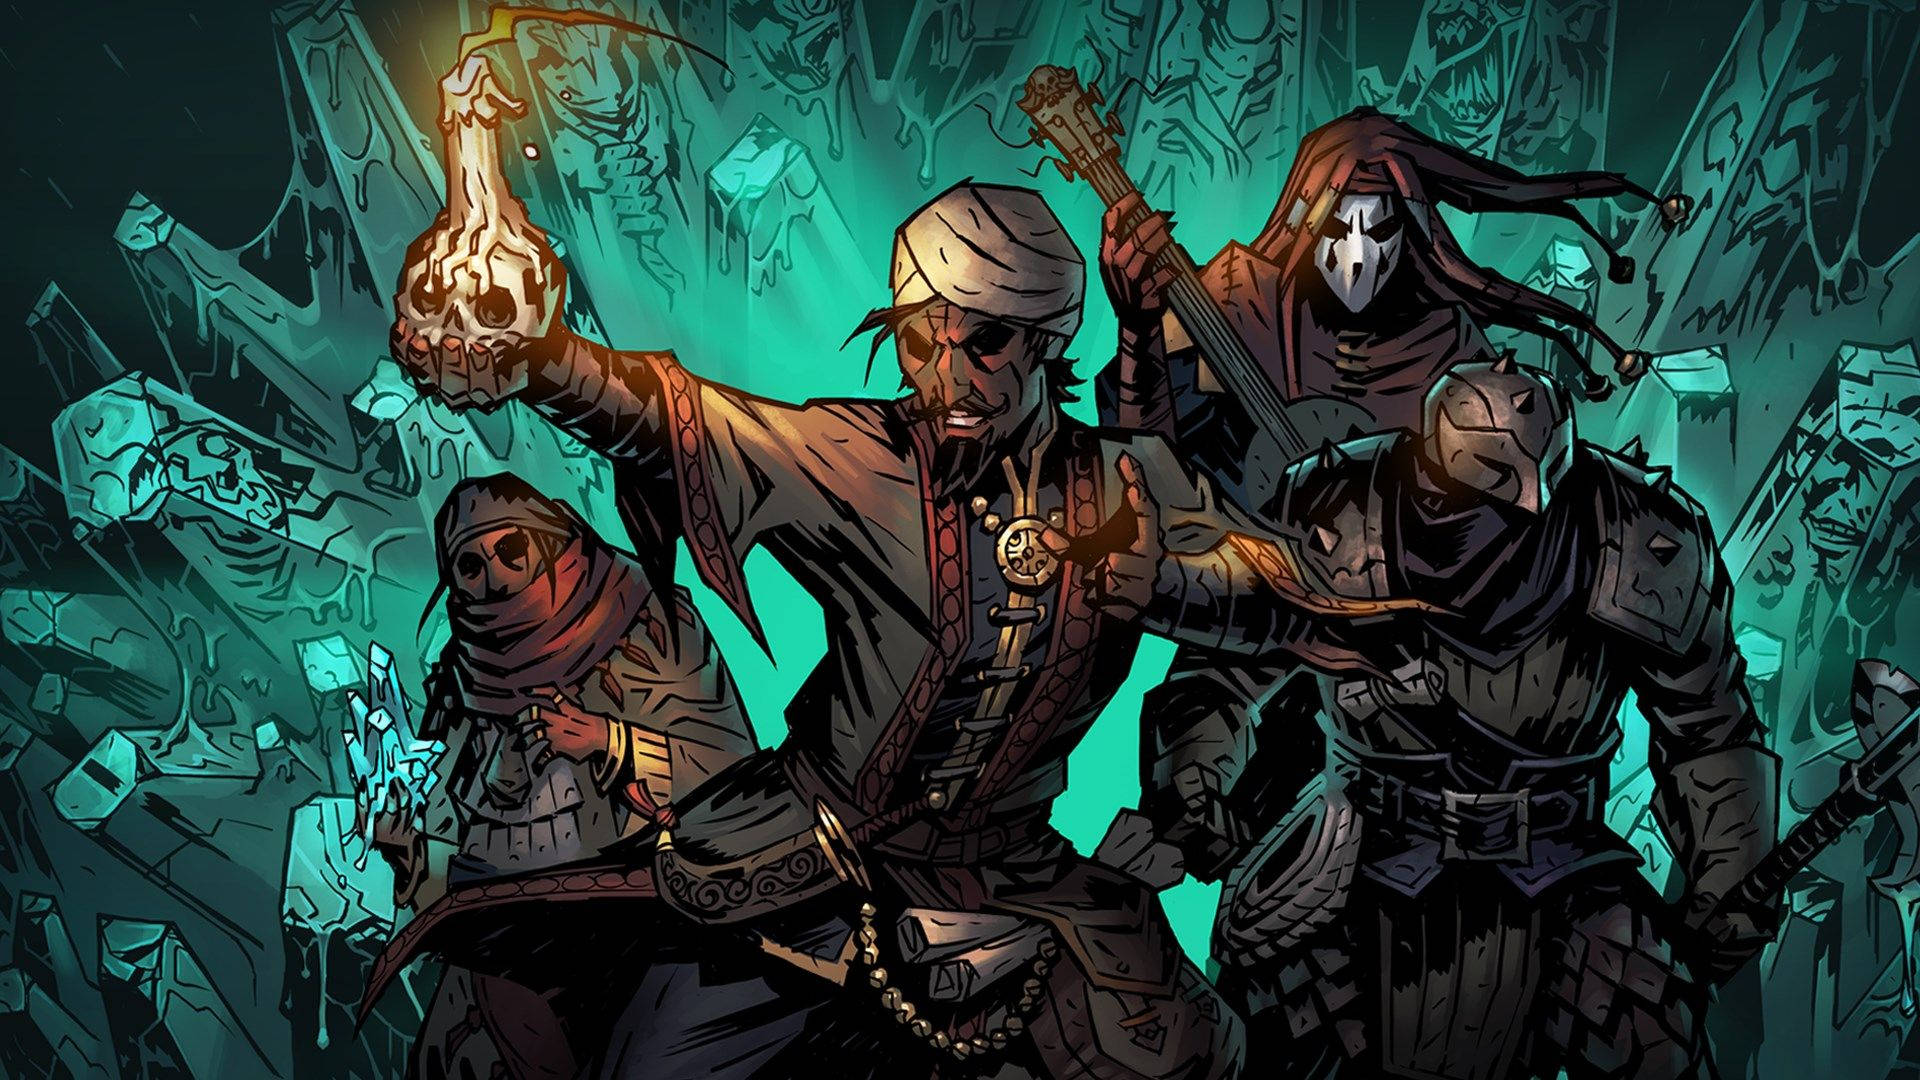 Face the endless onslaught of the Color of Madness in Darkest Dungeon. Wallpaper